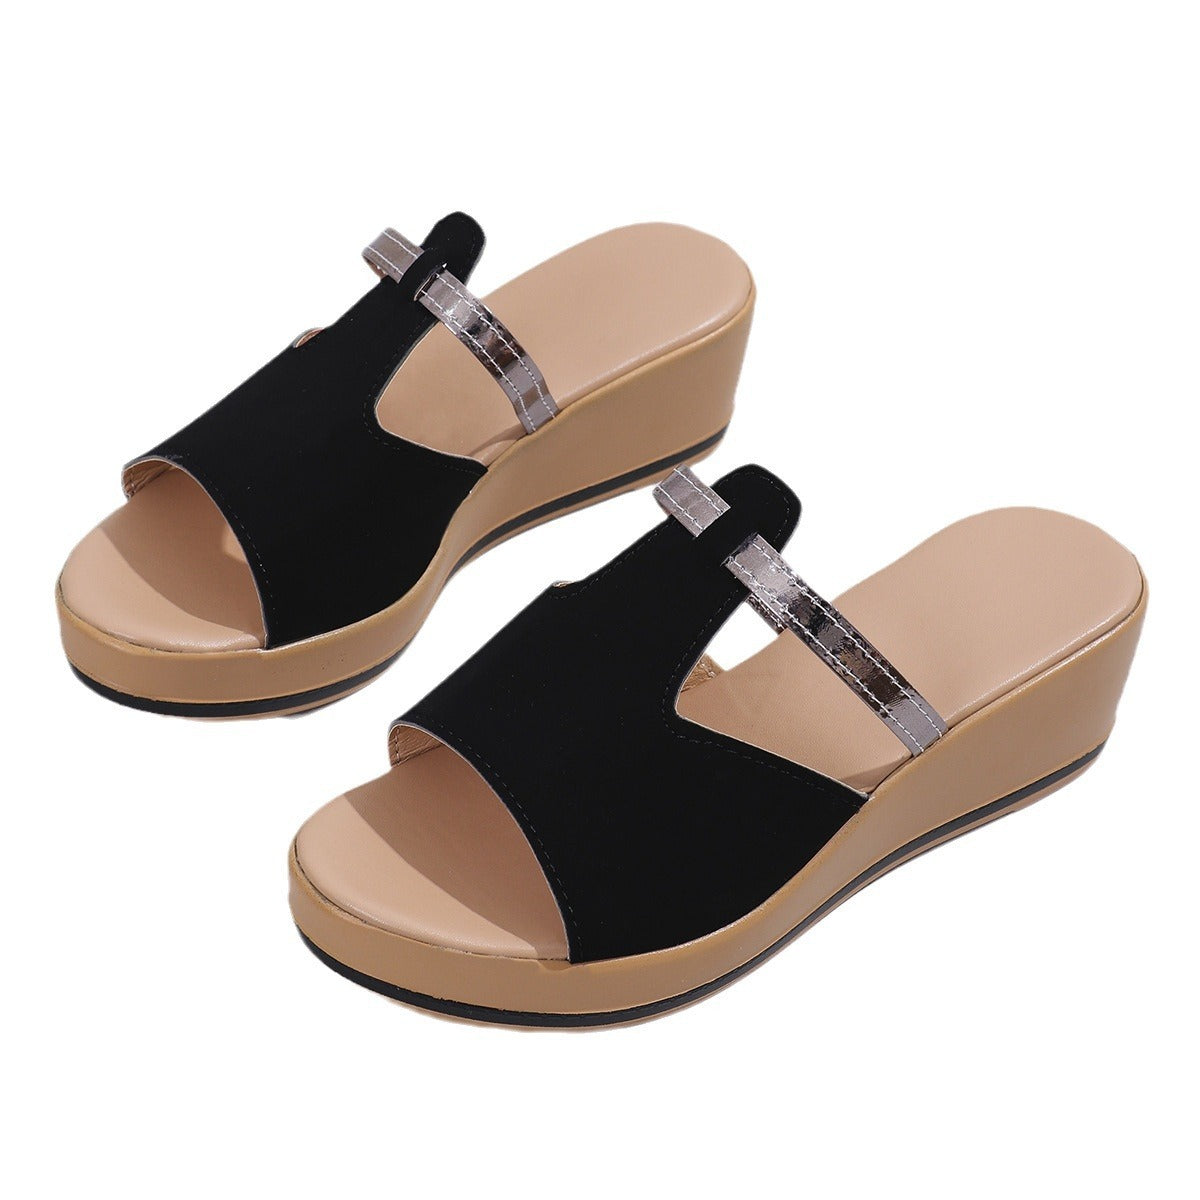 Summer Peep-toe Wedges Sandals Casual Thick Sole Heightening Slippers Fashion Outdoor Slides Shoes Women